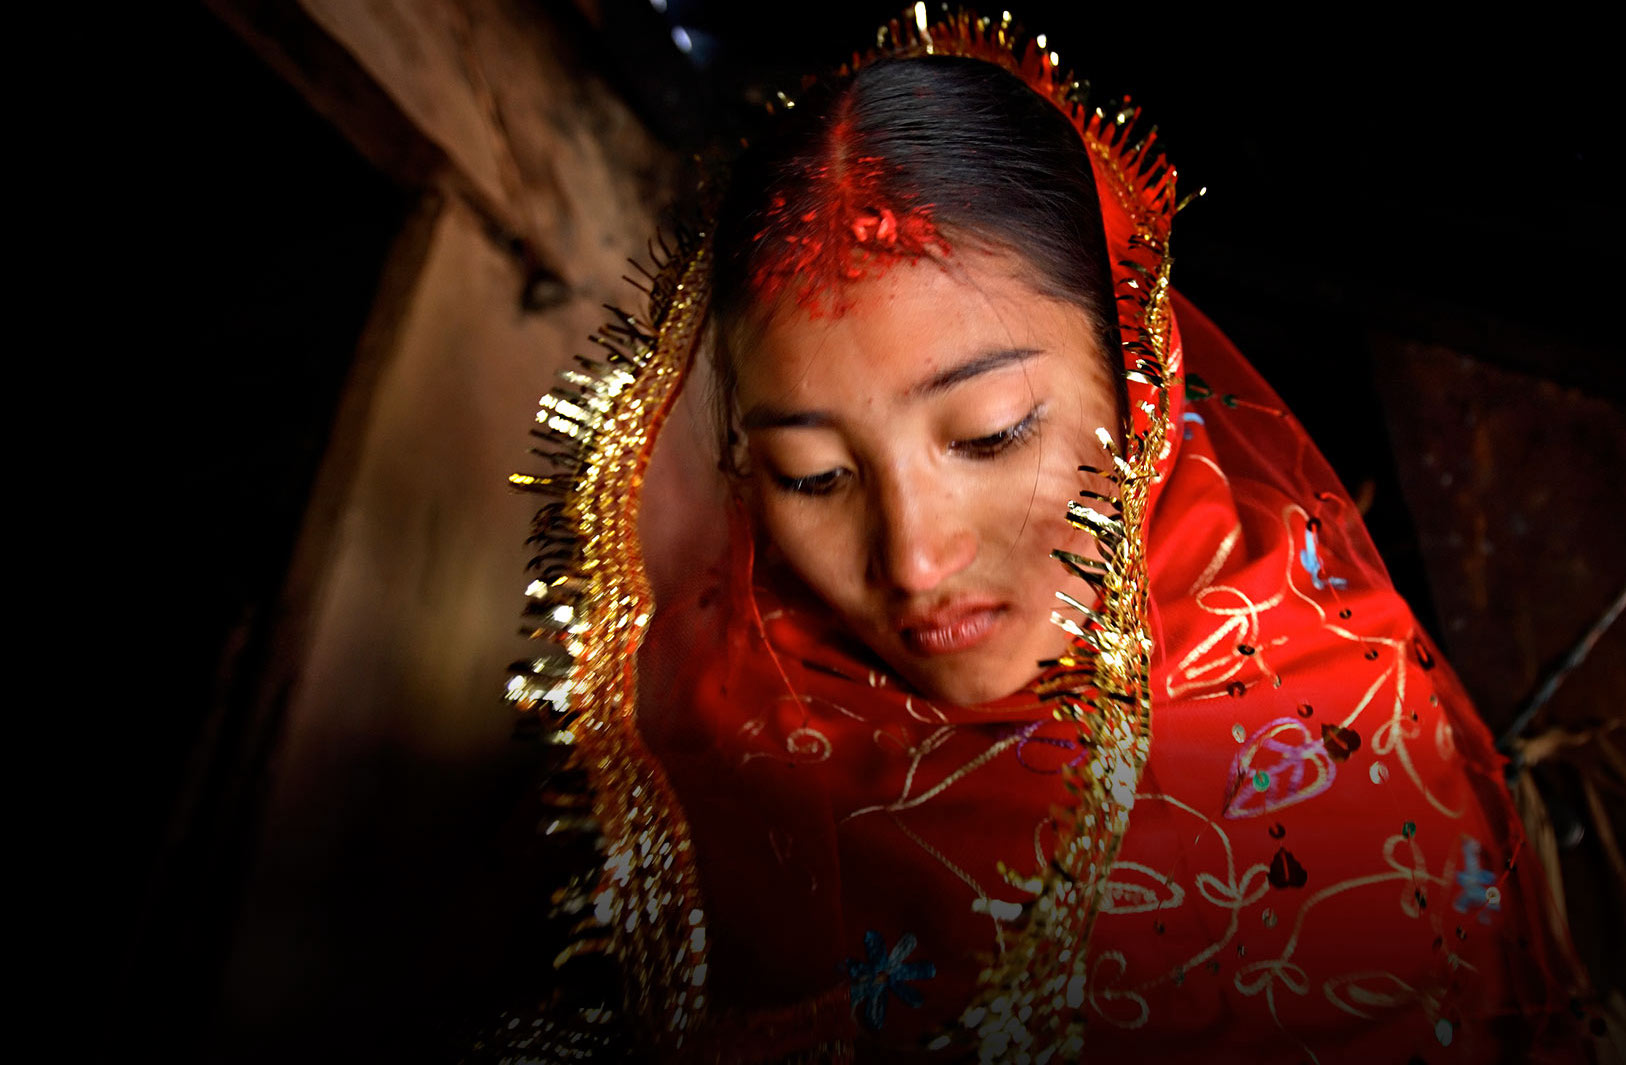 Child Marriage Council on Foreign Relations image